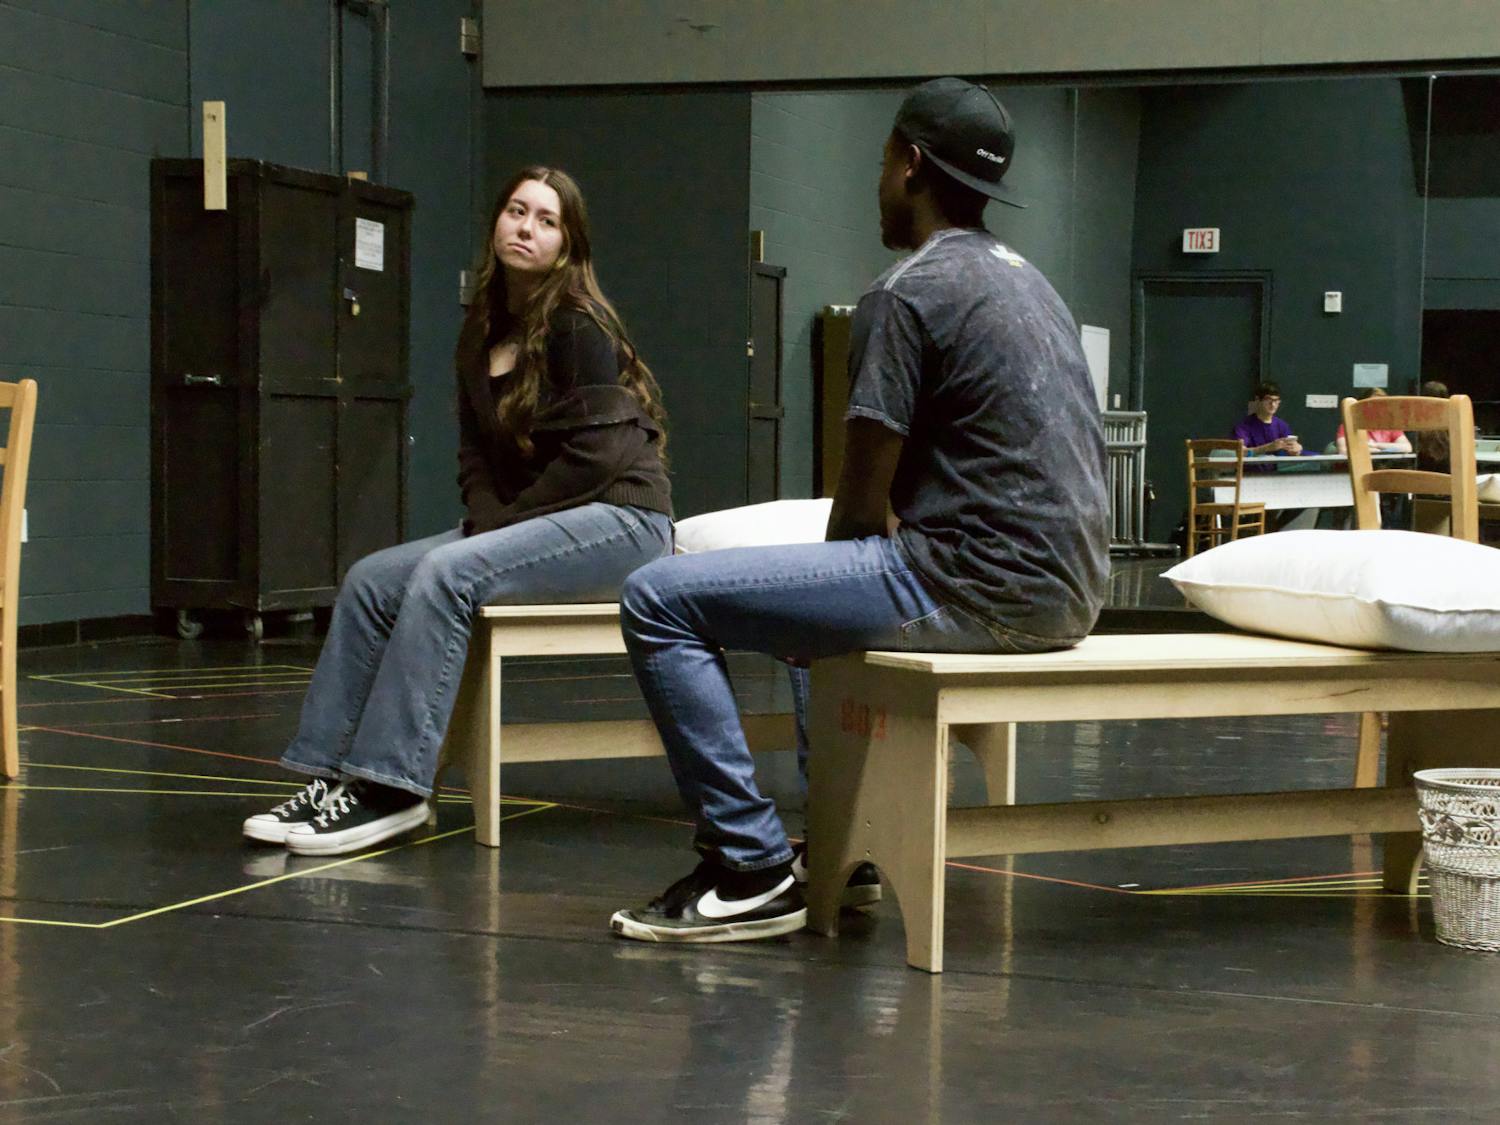 Actors rehearse for the debut of Gruesome Playground Injuries, a fully student-directed play.